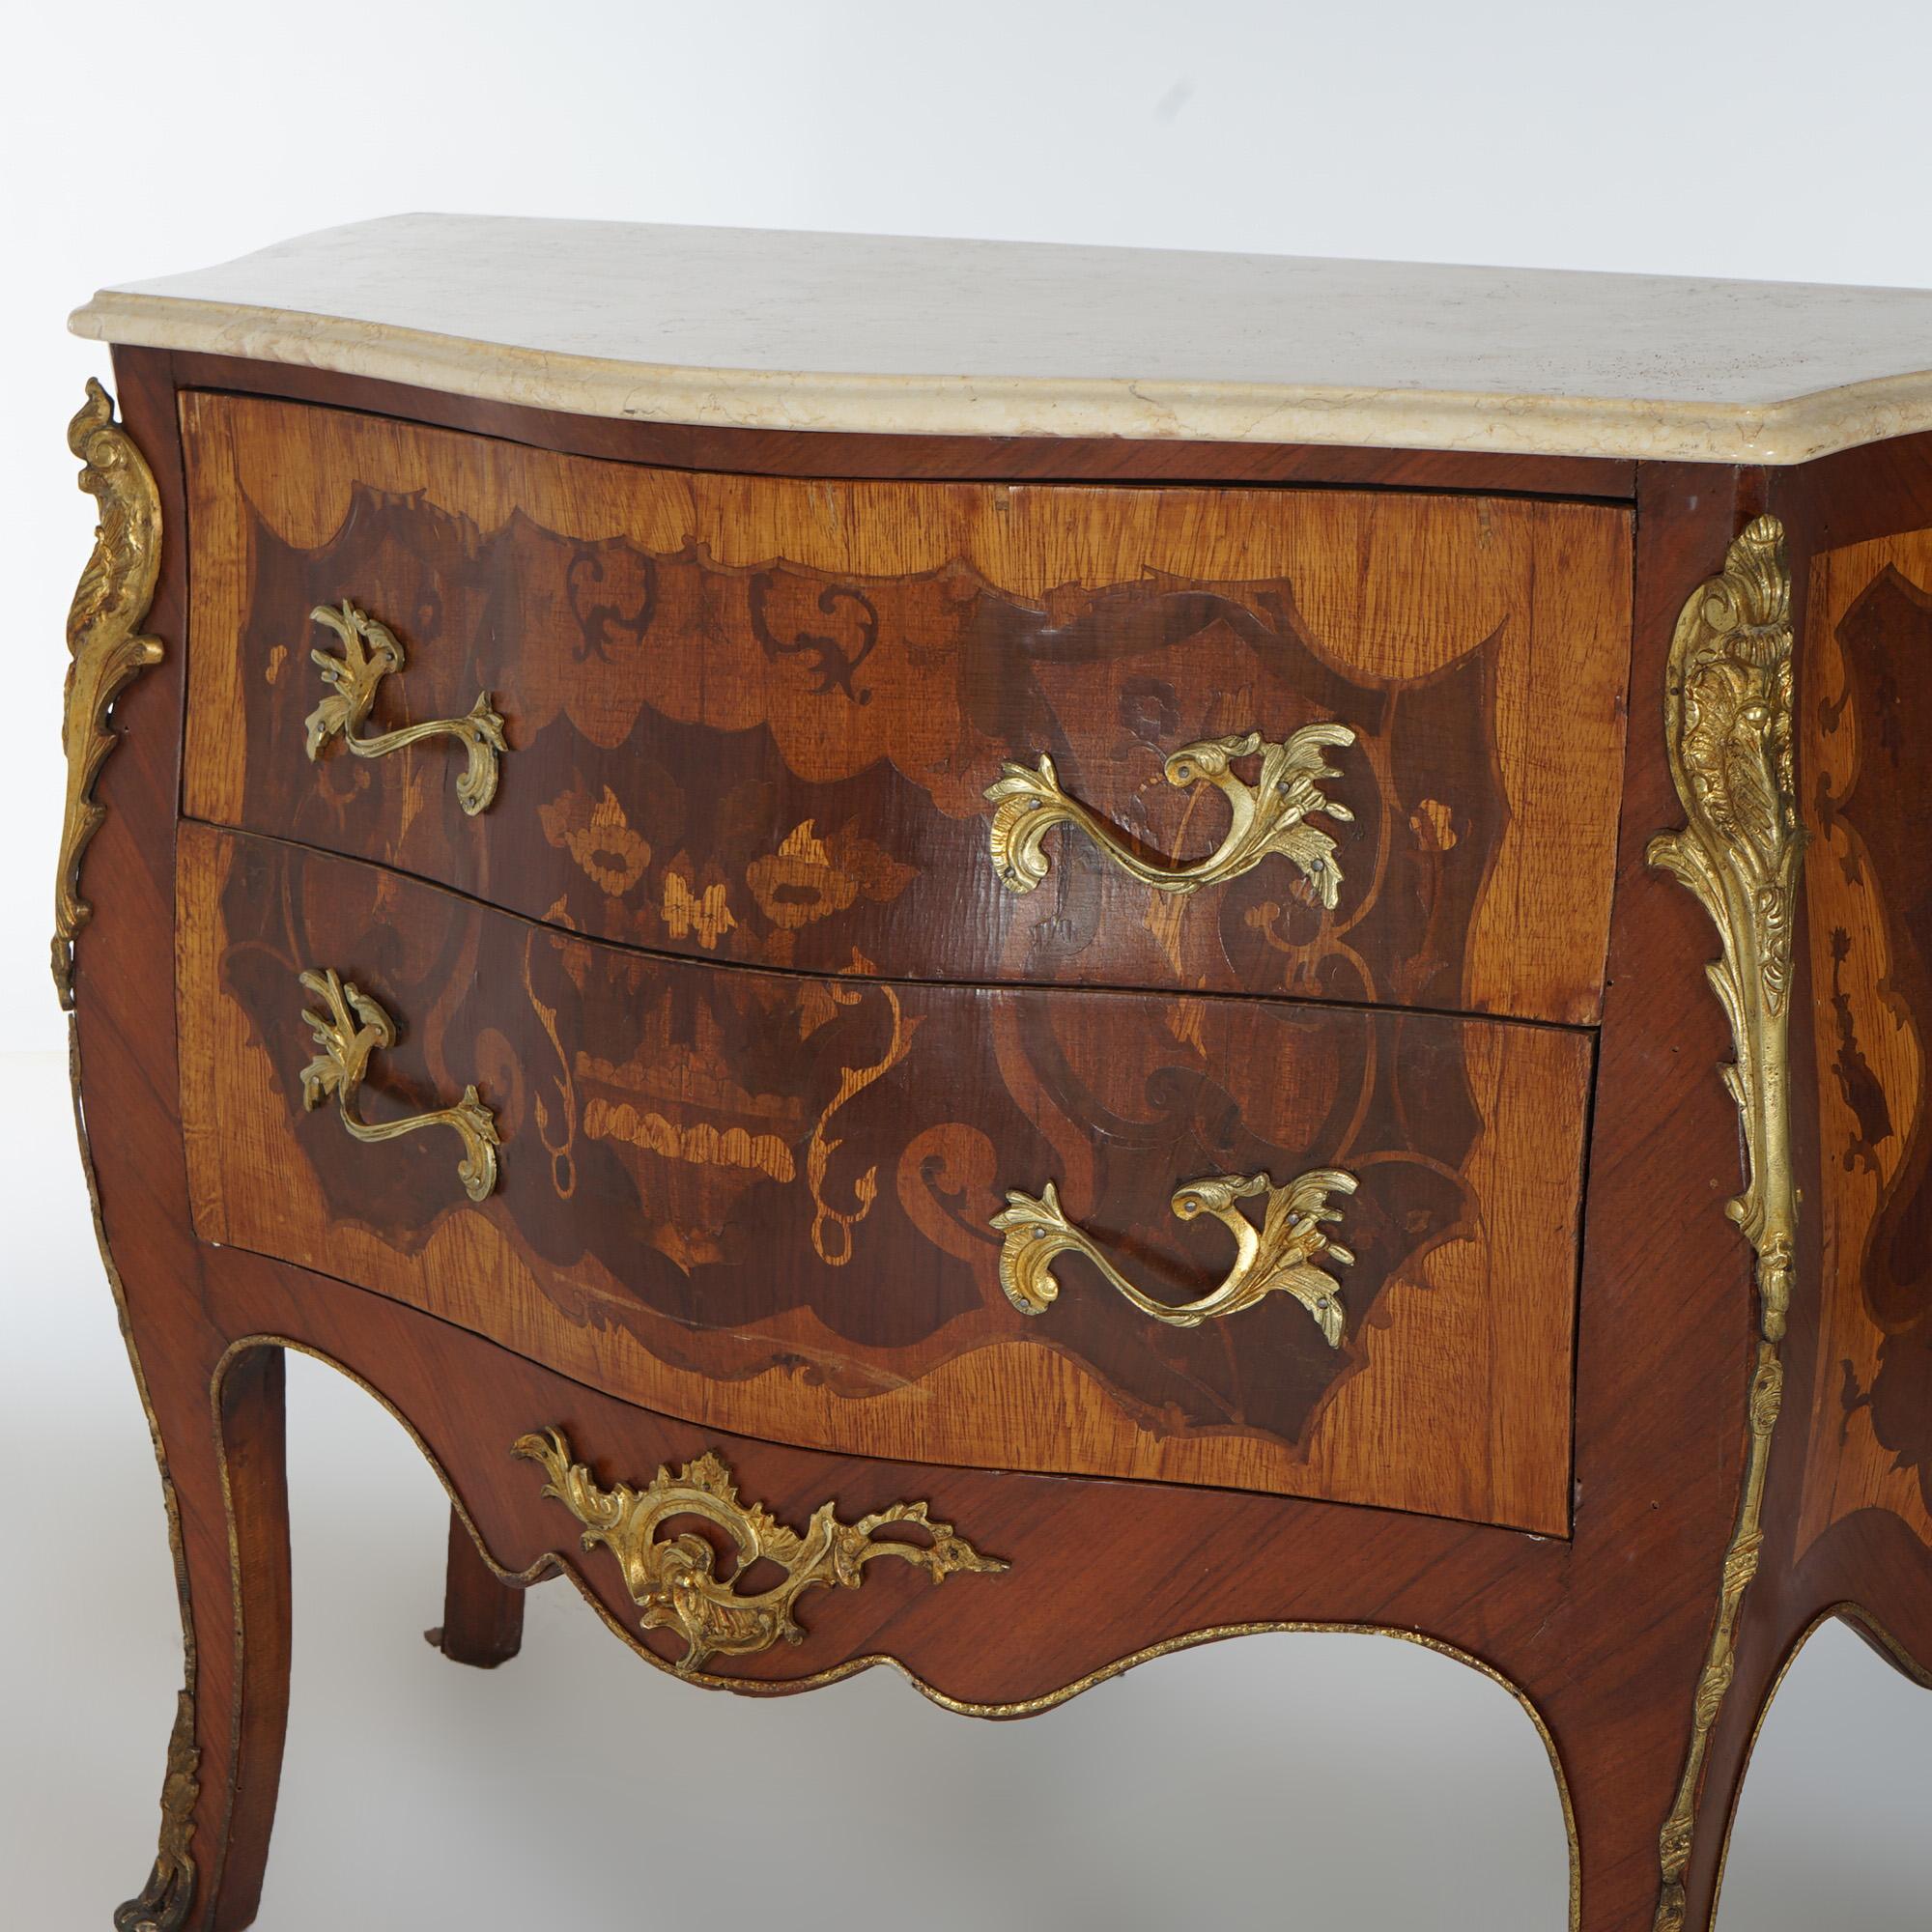 20th Century Antique Louis XV Style Marble, Ormolu, Satinwood & Kingwood Inlaid Commode 20thC For Sale